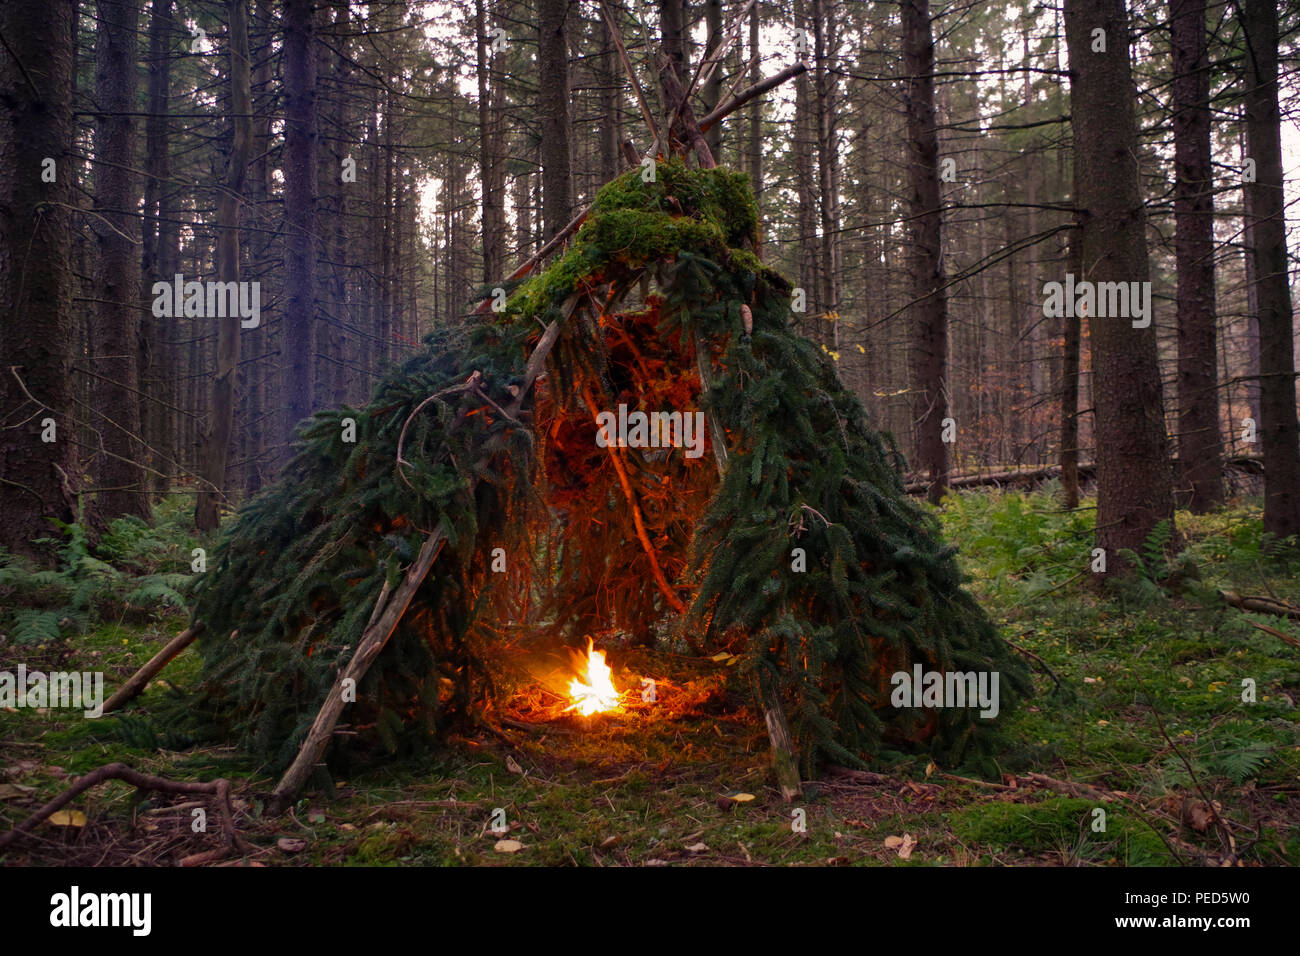 Primitive Bushcraft Wikiup / Teepee Survival Shelter with Campfire inside. This traditional spruce bough campsite is located in a forest wilderness Stock Photo